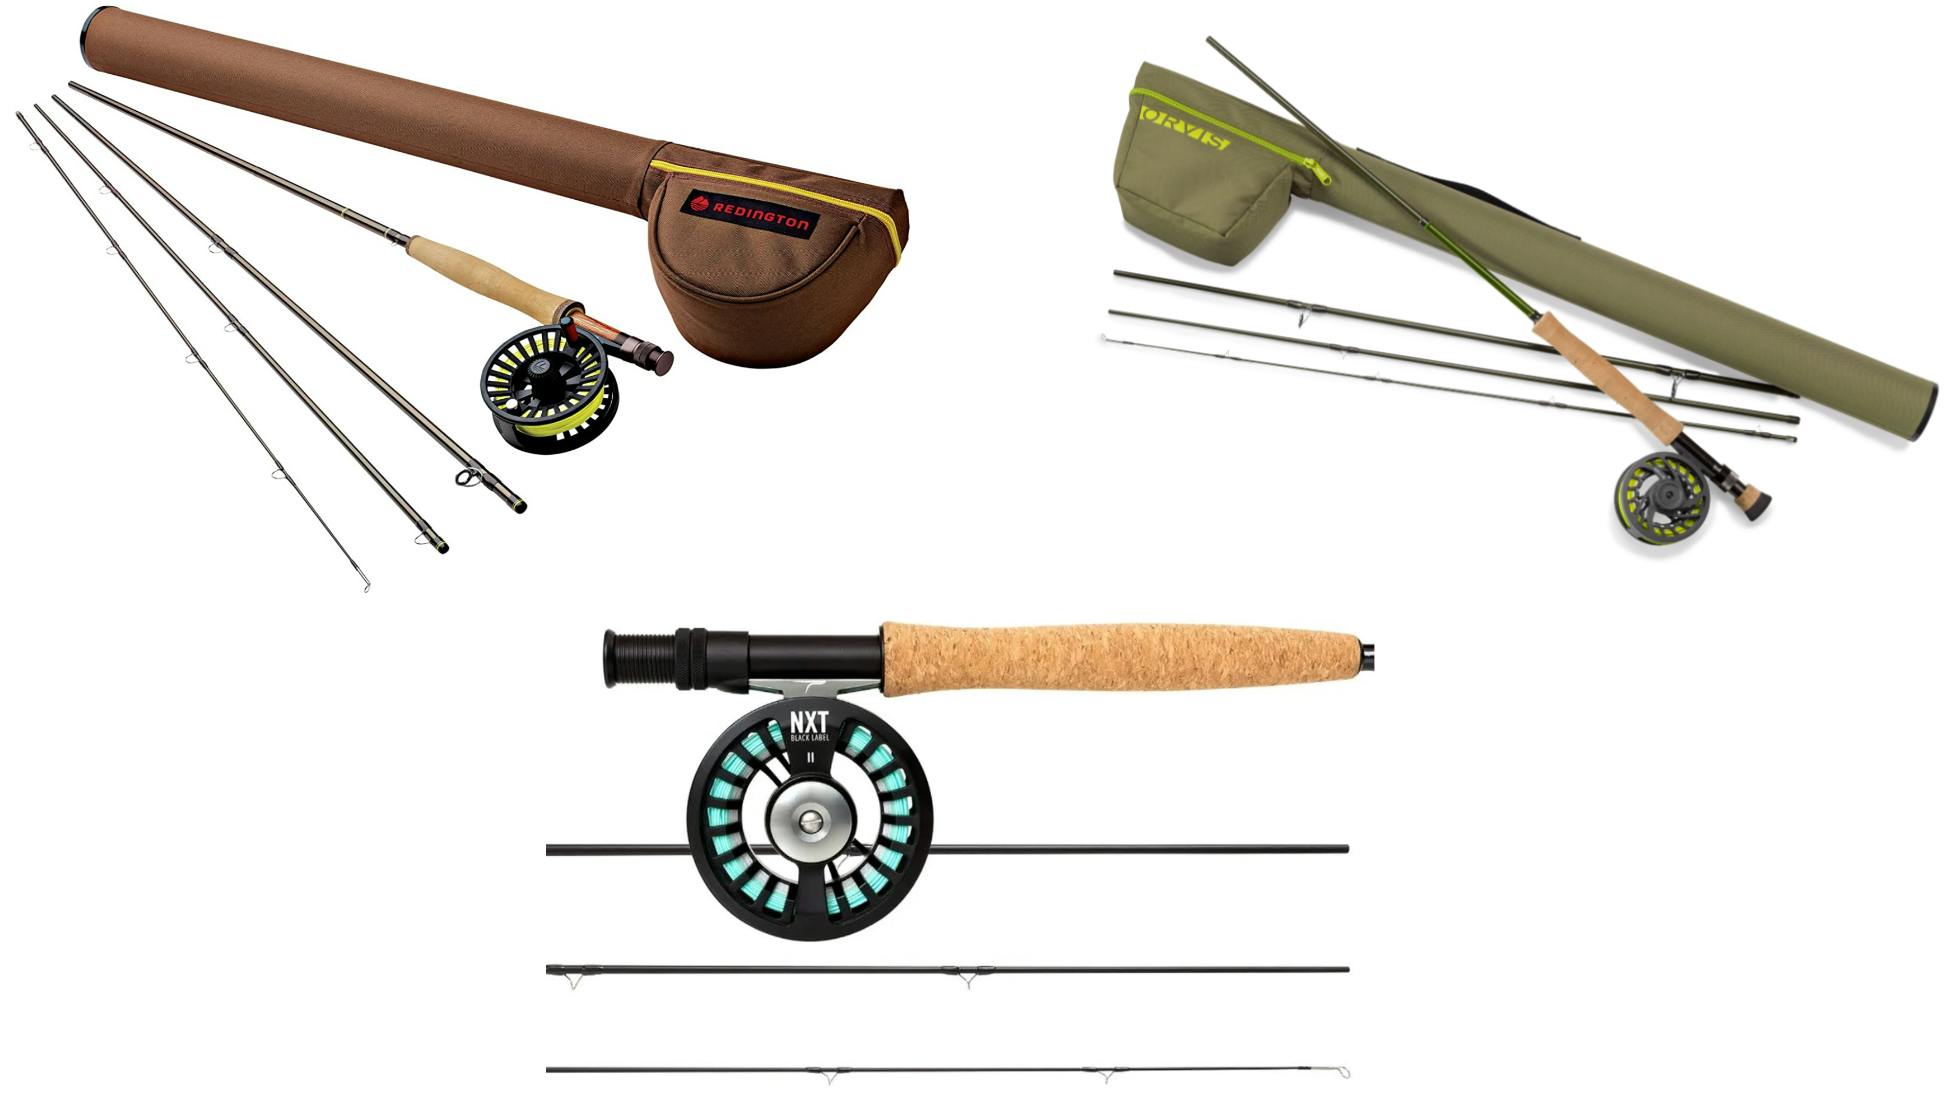 Three fly rod outfits. The Redington Path outfit (top left), the Temple Fork Outfitters NXT Black Label outfit (bottom) and the Orvis Encounter outfit (top right).